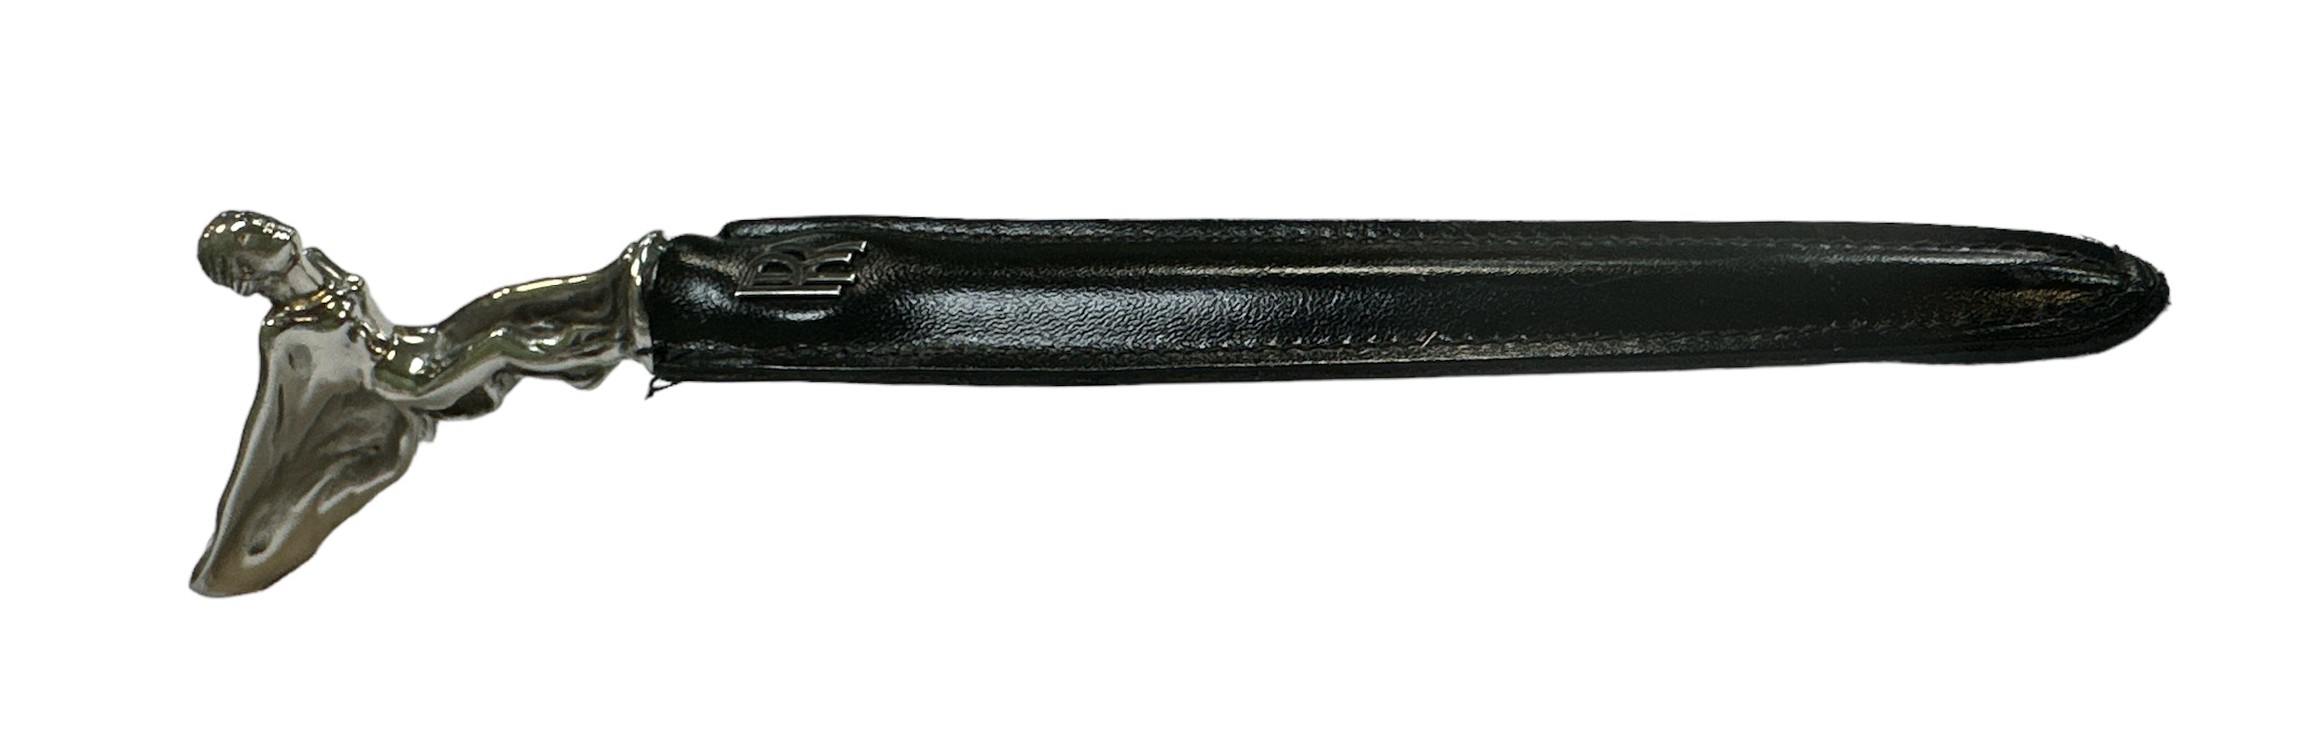 Rolls Royce limited edition Spirit of Ecstasy showroom desk letter opener, as issued by Rolls - Image 2 of 3